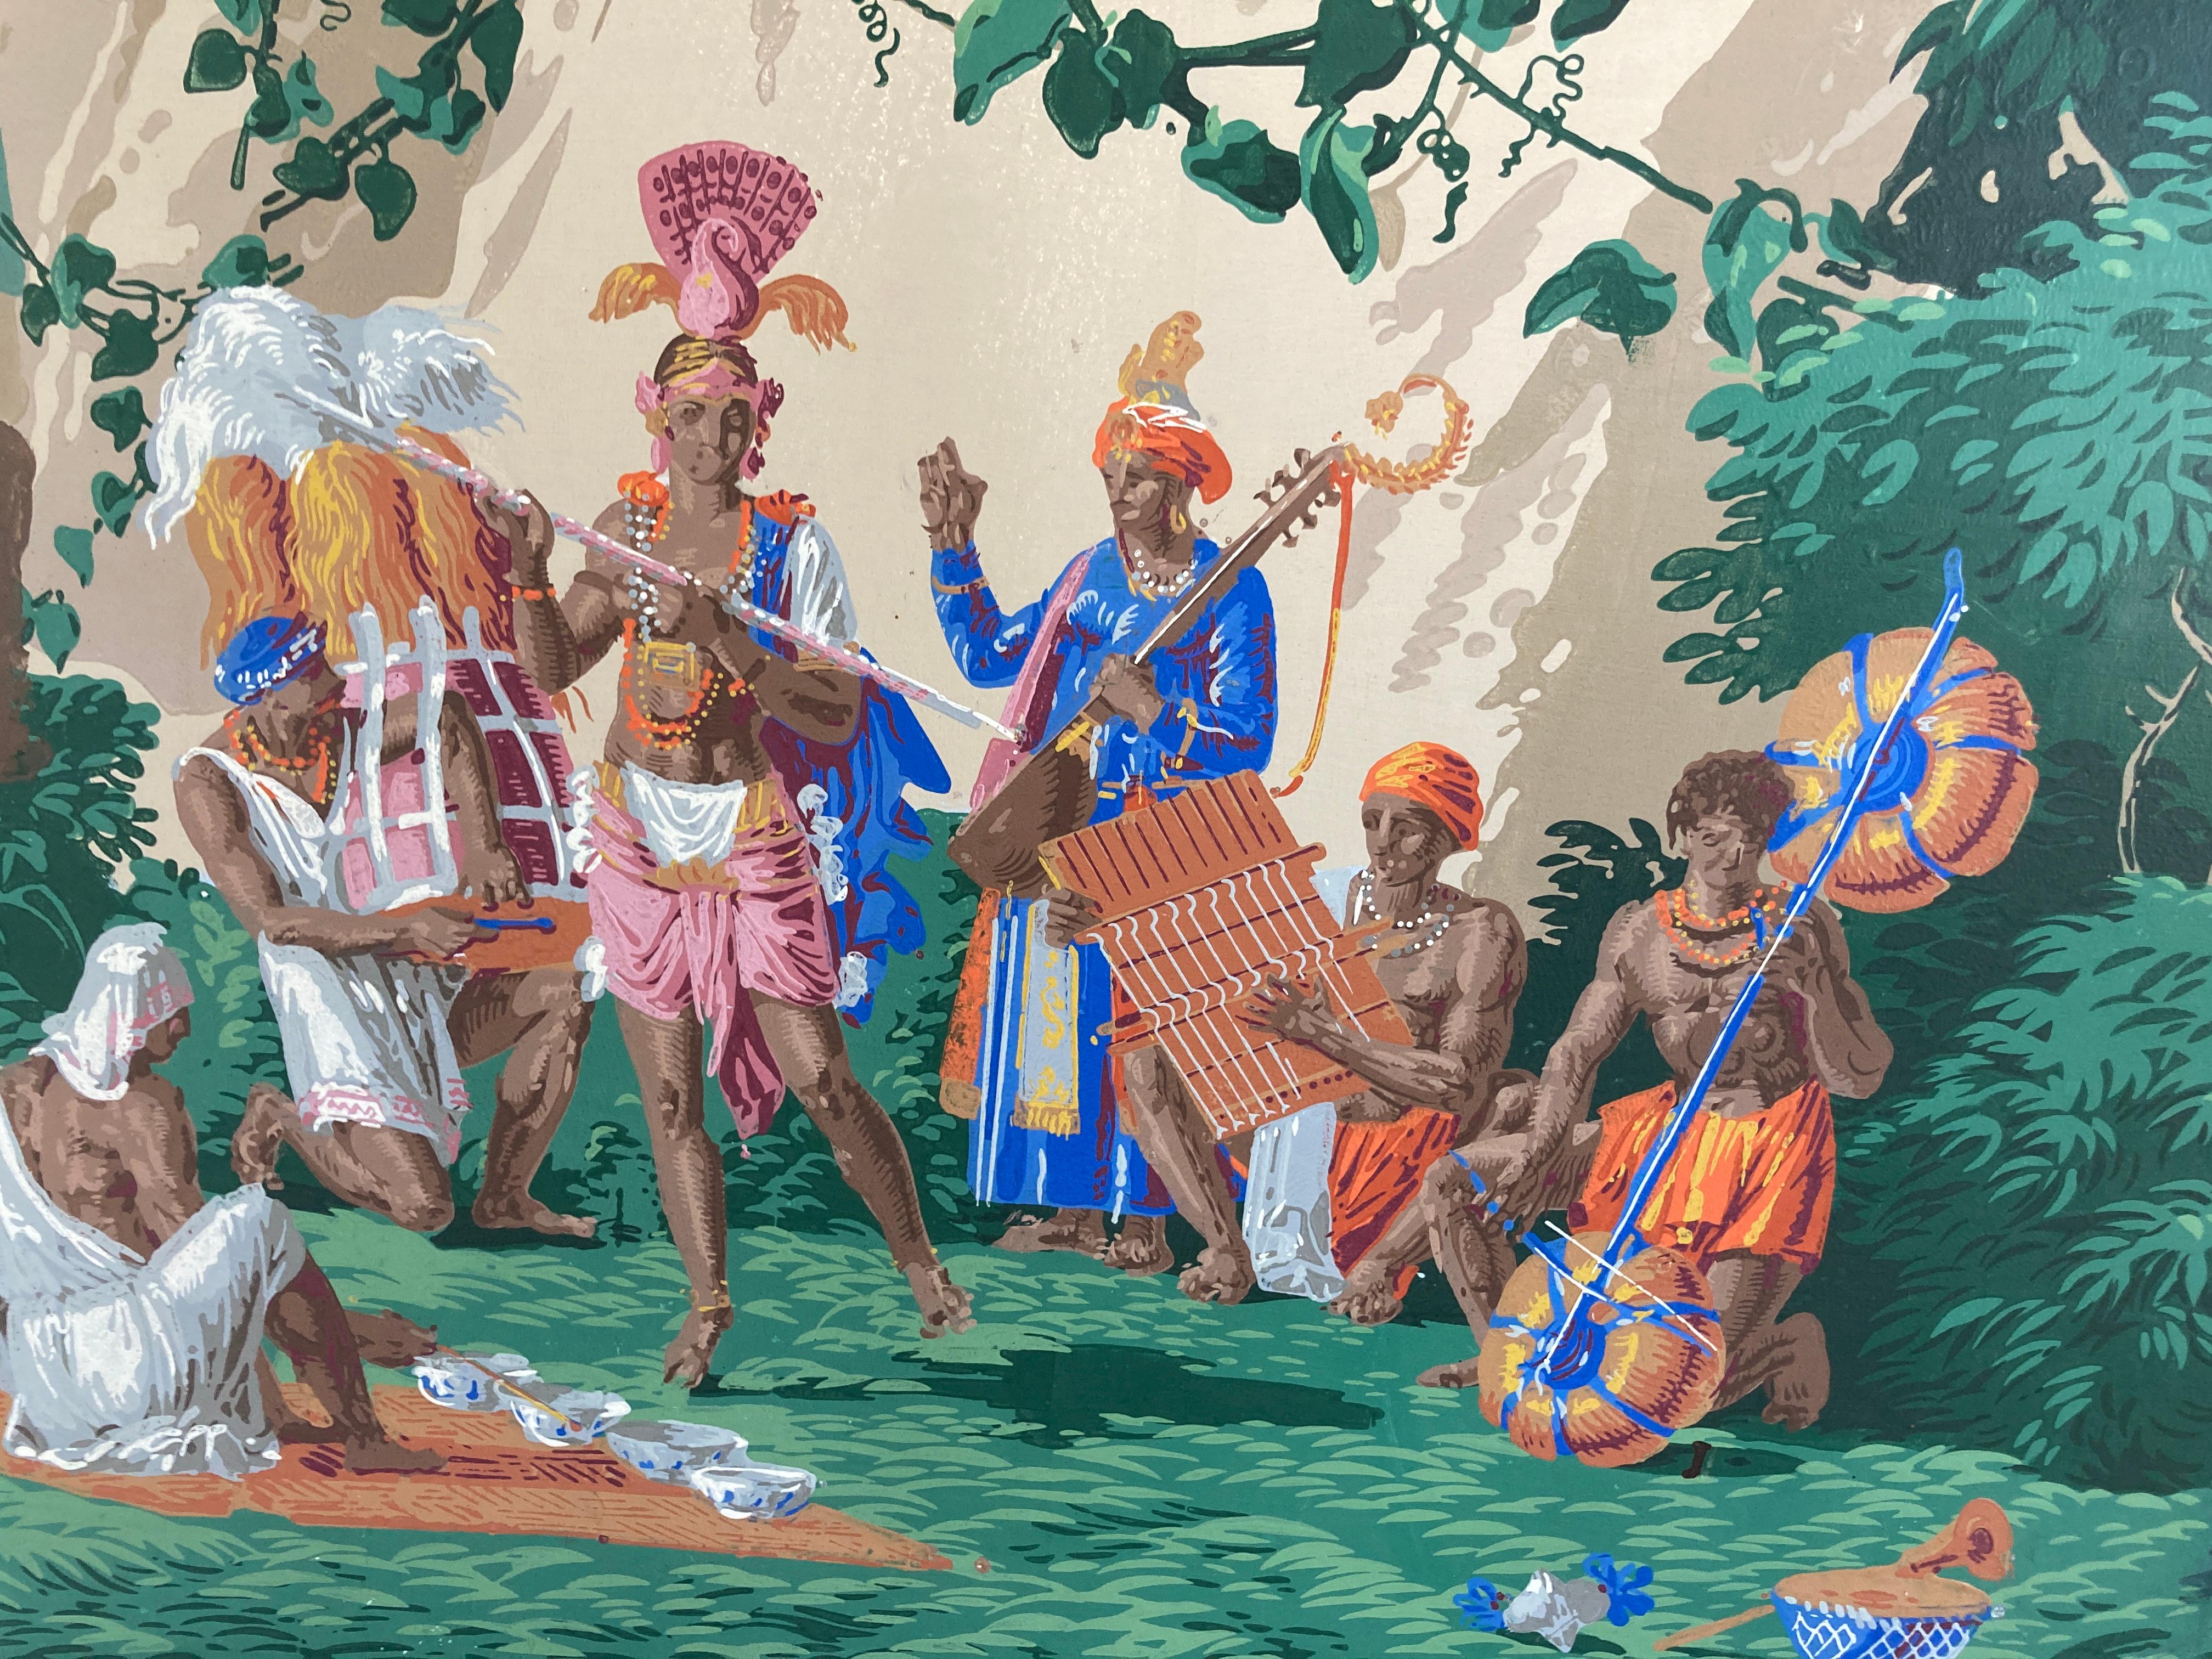 Anglo Raj The Hindustan Panoramic Wallpaper Panels by Zuber & Cie. Rixhem, France